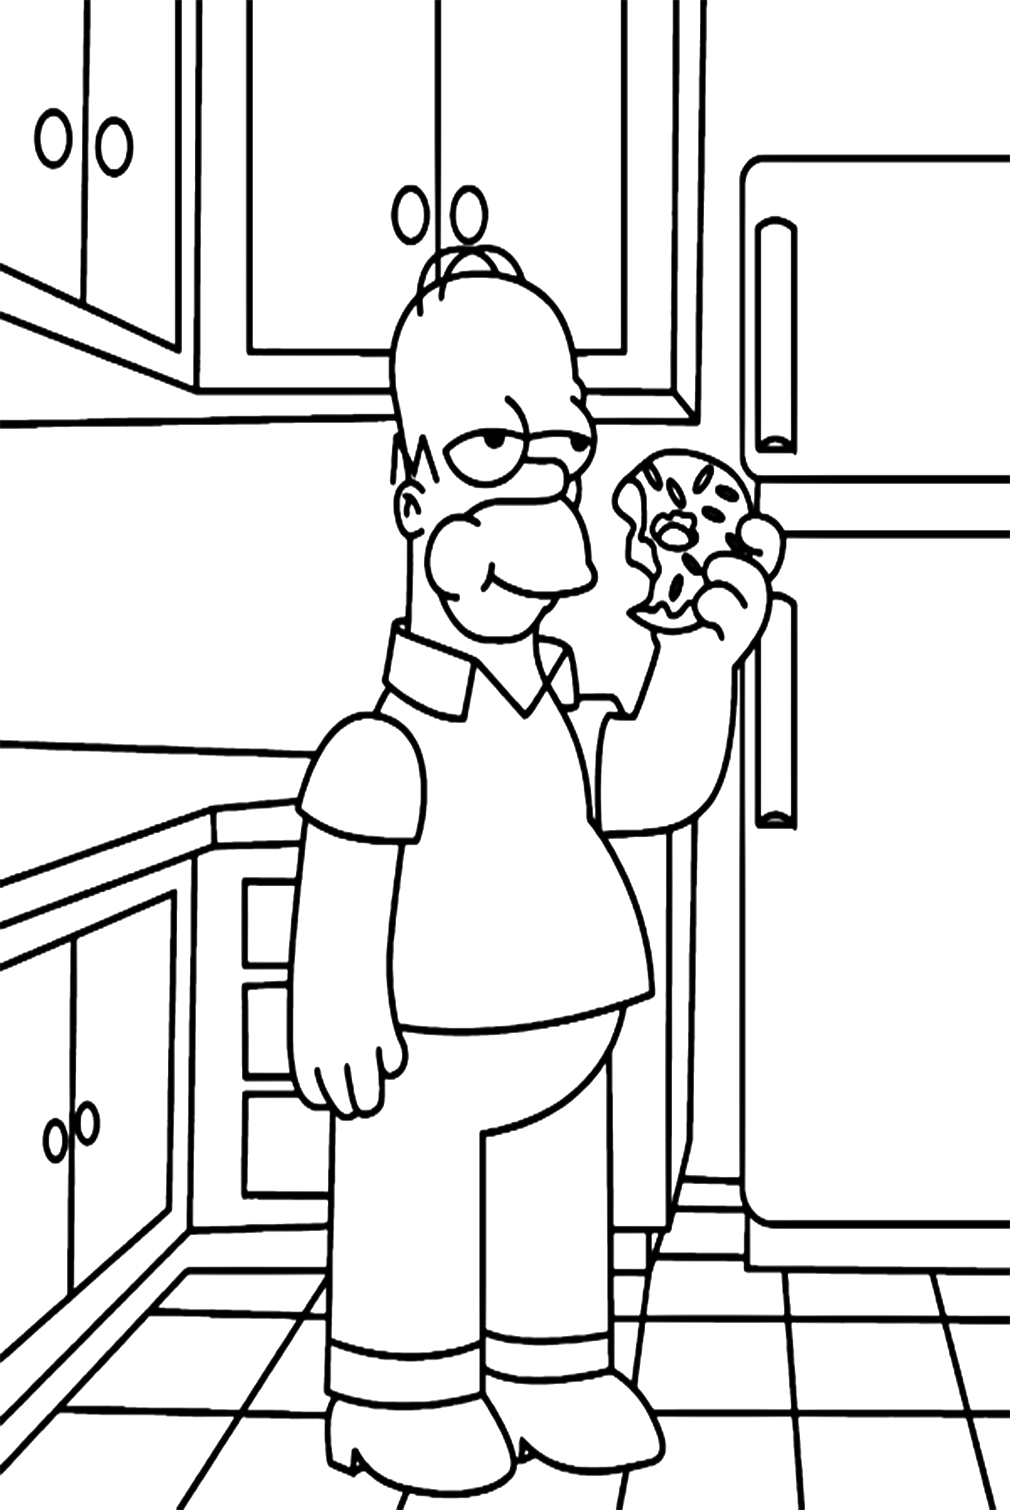 Simspons Eating Donut Coloring Page from Donut